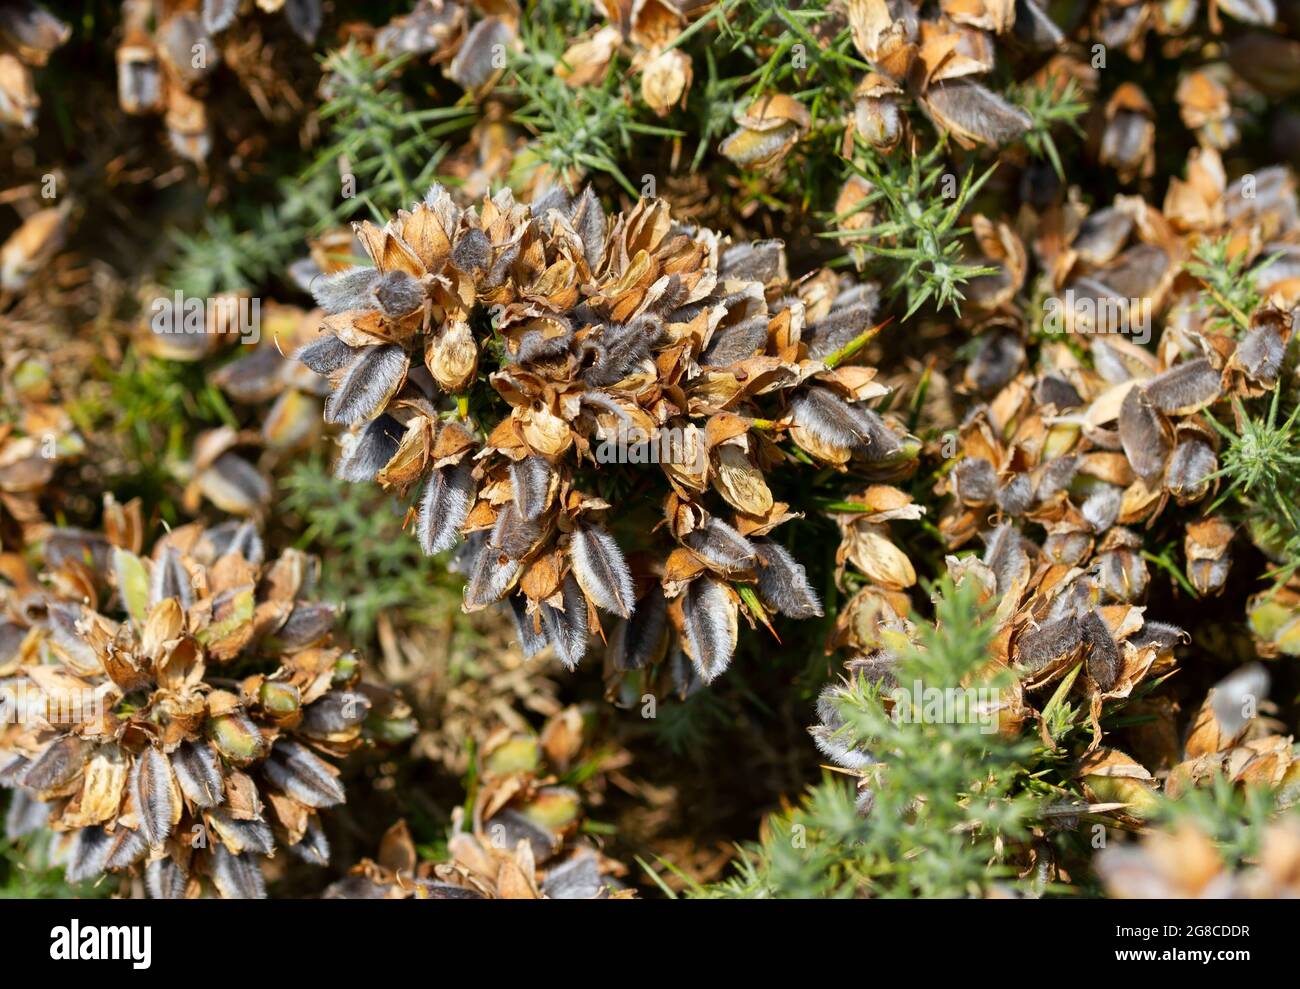 In summer the furry seed cases of the Gorse bush split open with a cracking noise and fling their seeds a distance from the the parent plant. Stock Photo